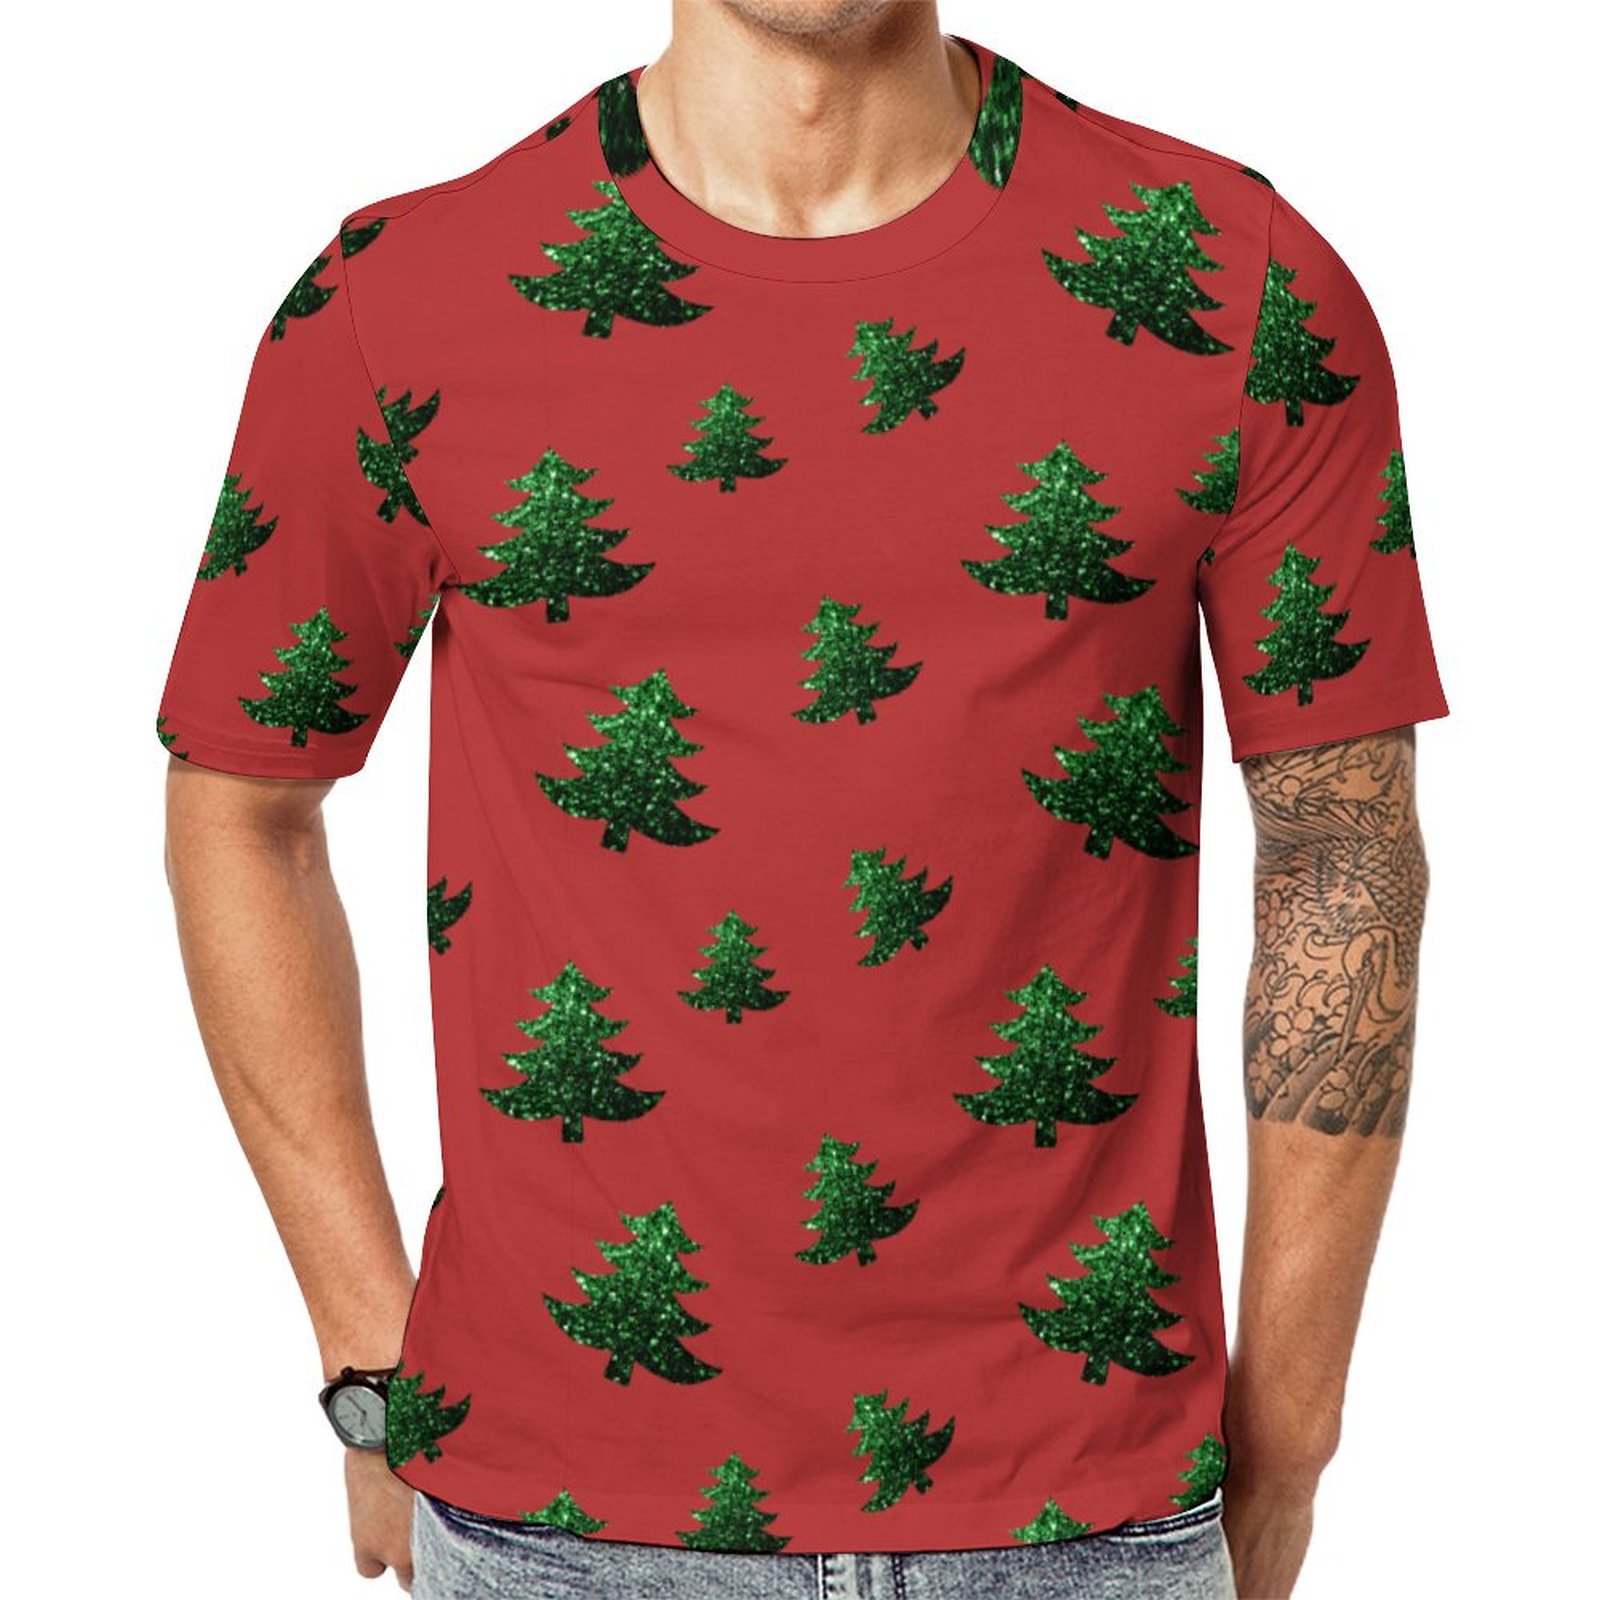 Sparkly Christmas Tree Green Sparkles Print Red Short Sleeve Print Unisex Tshirt Summer Casual Tees for Men and Women Coolcoshirts